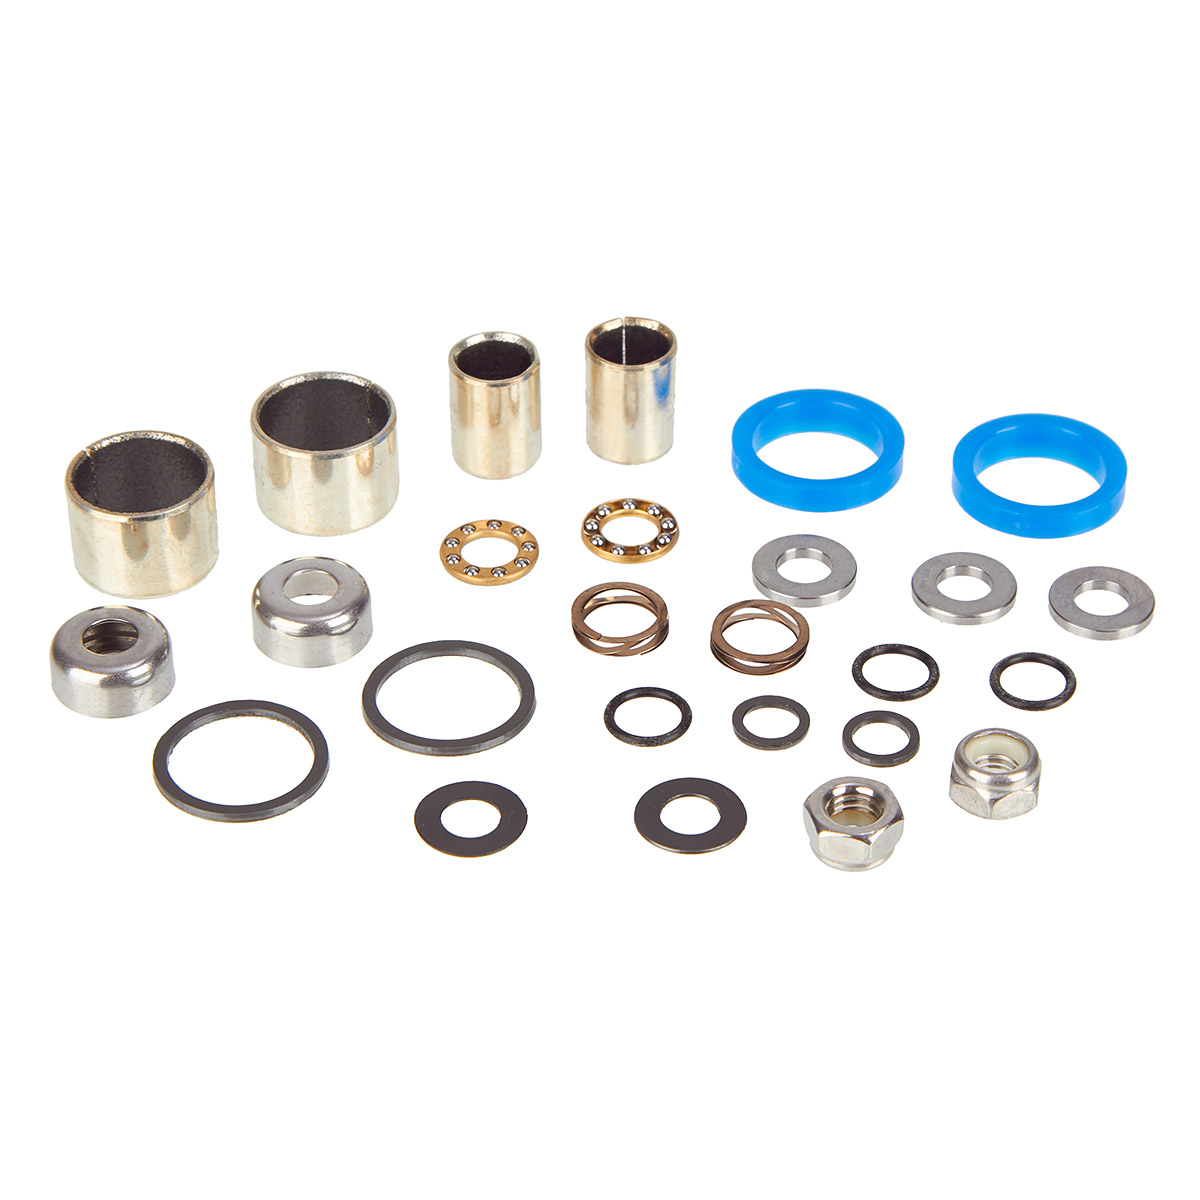 HT Components Kit Revisione Pedali  for EVO Pedals starting 2015